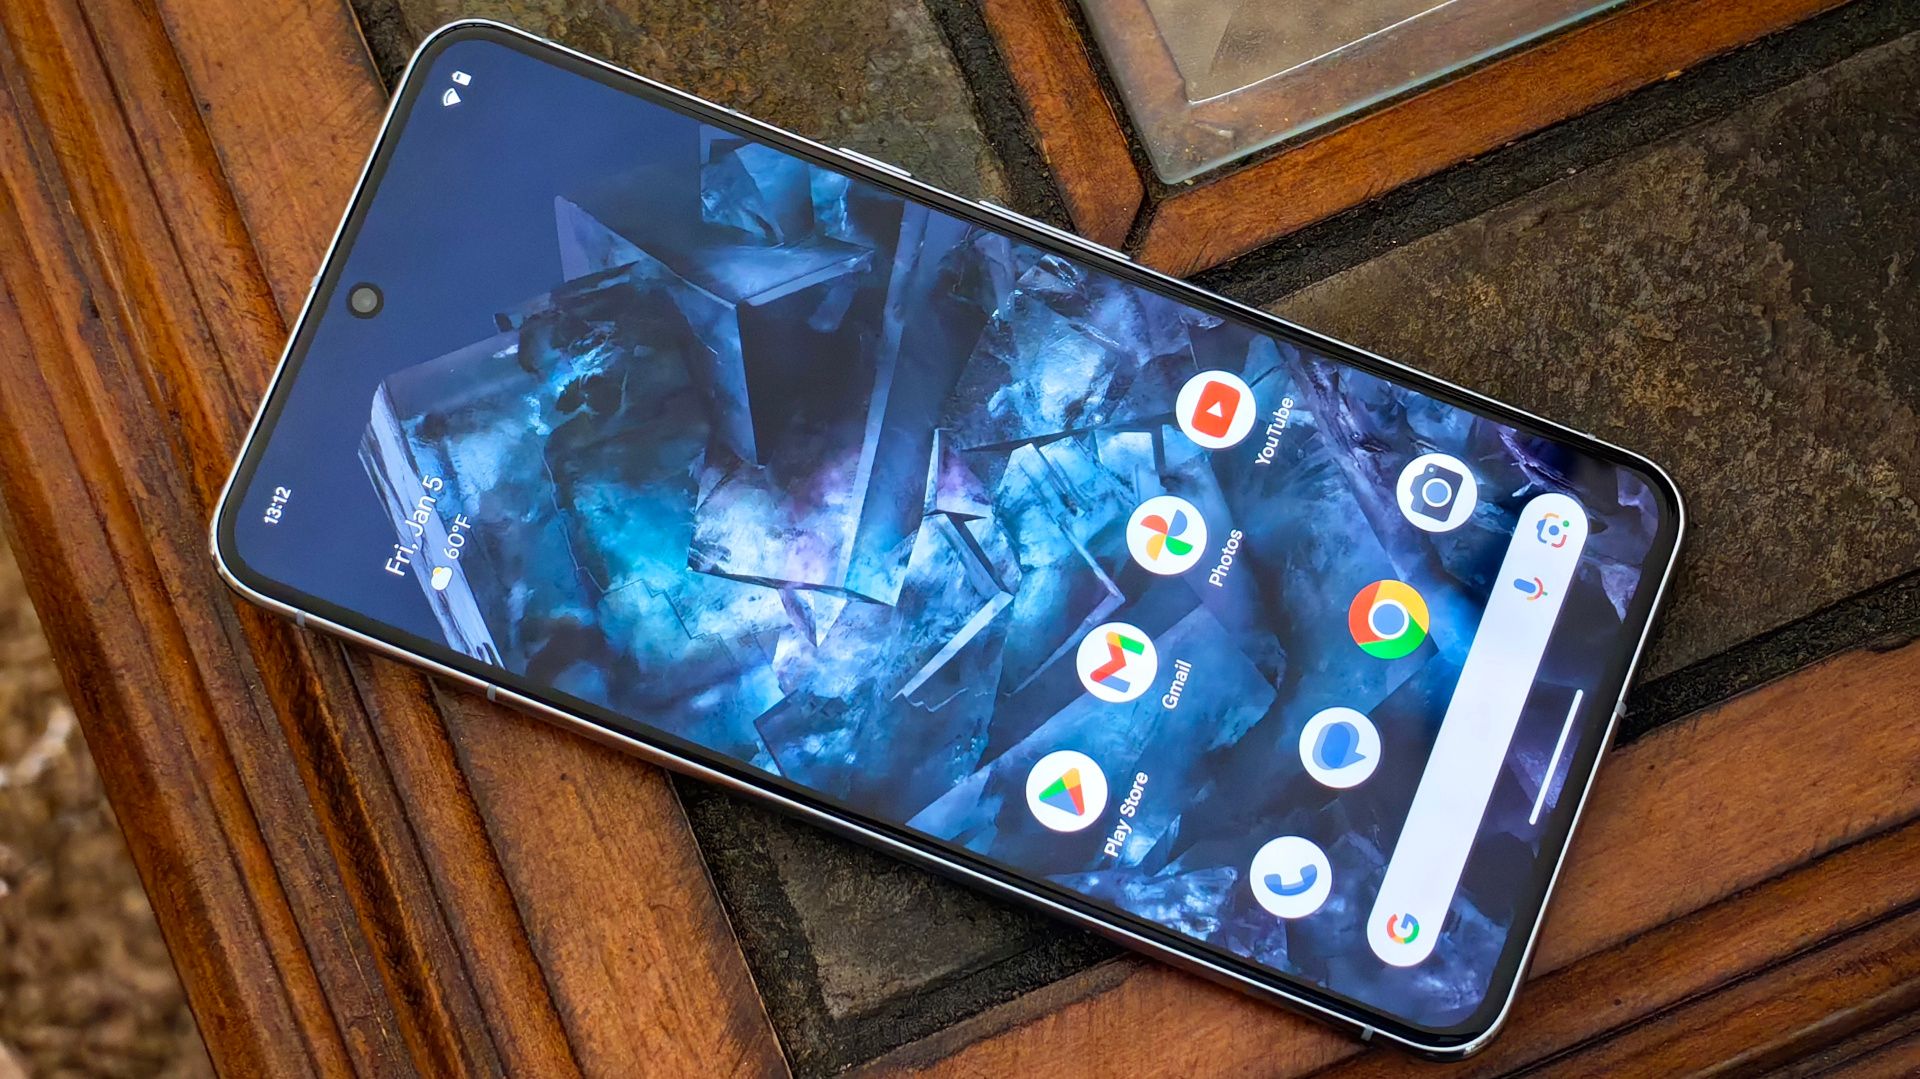 A Google Pixel 8 Pro with an illuminated display sits on a wooden table